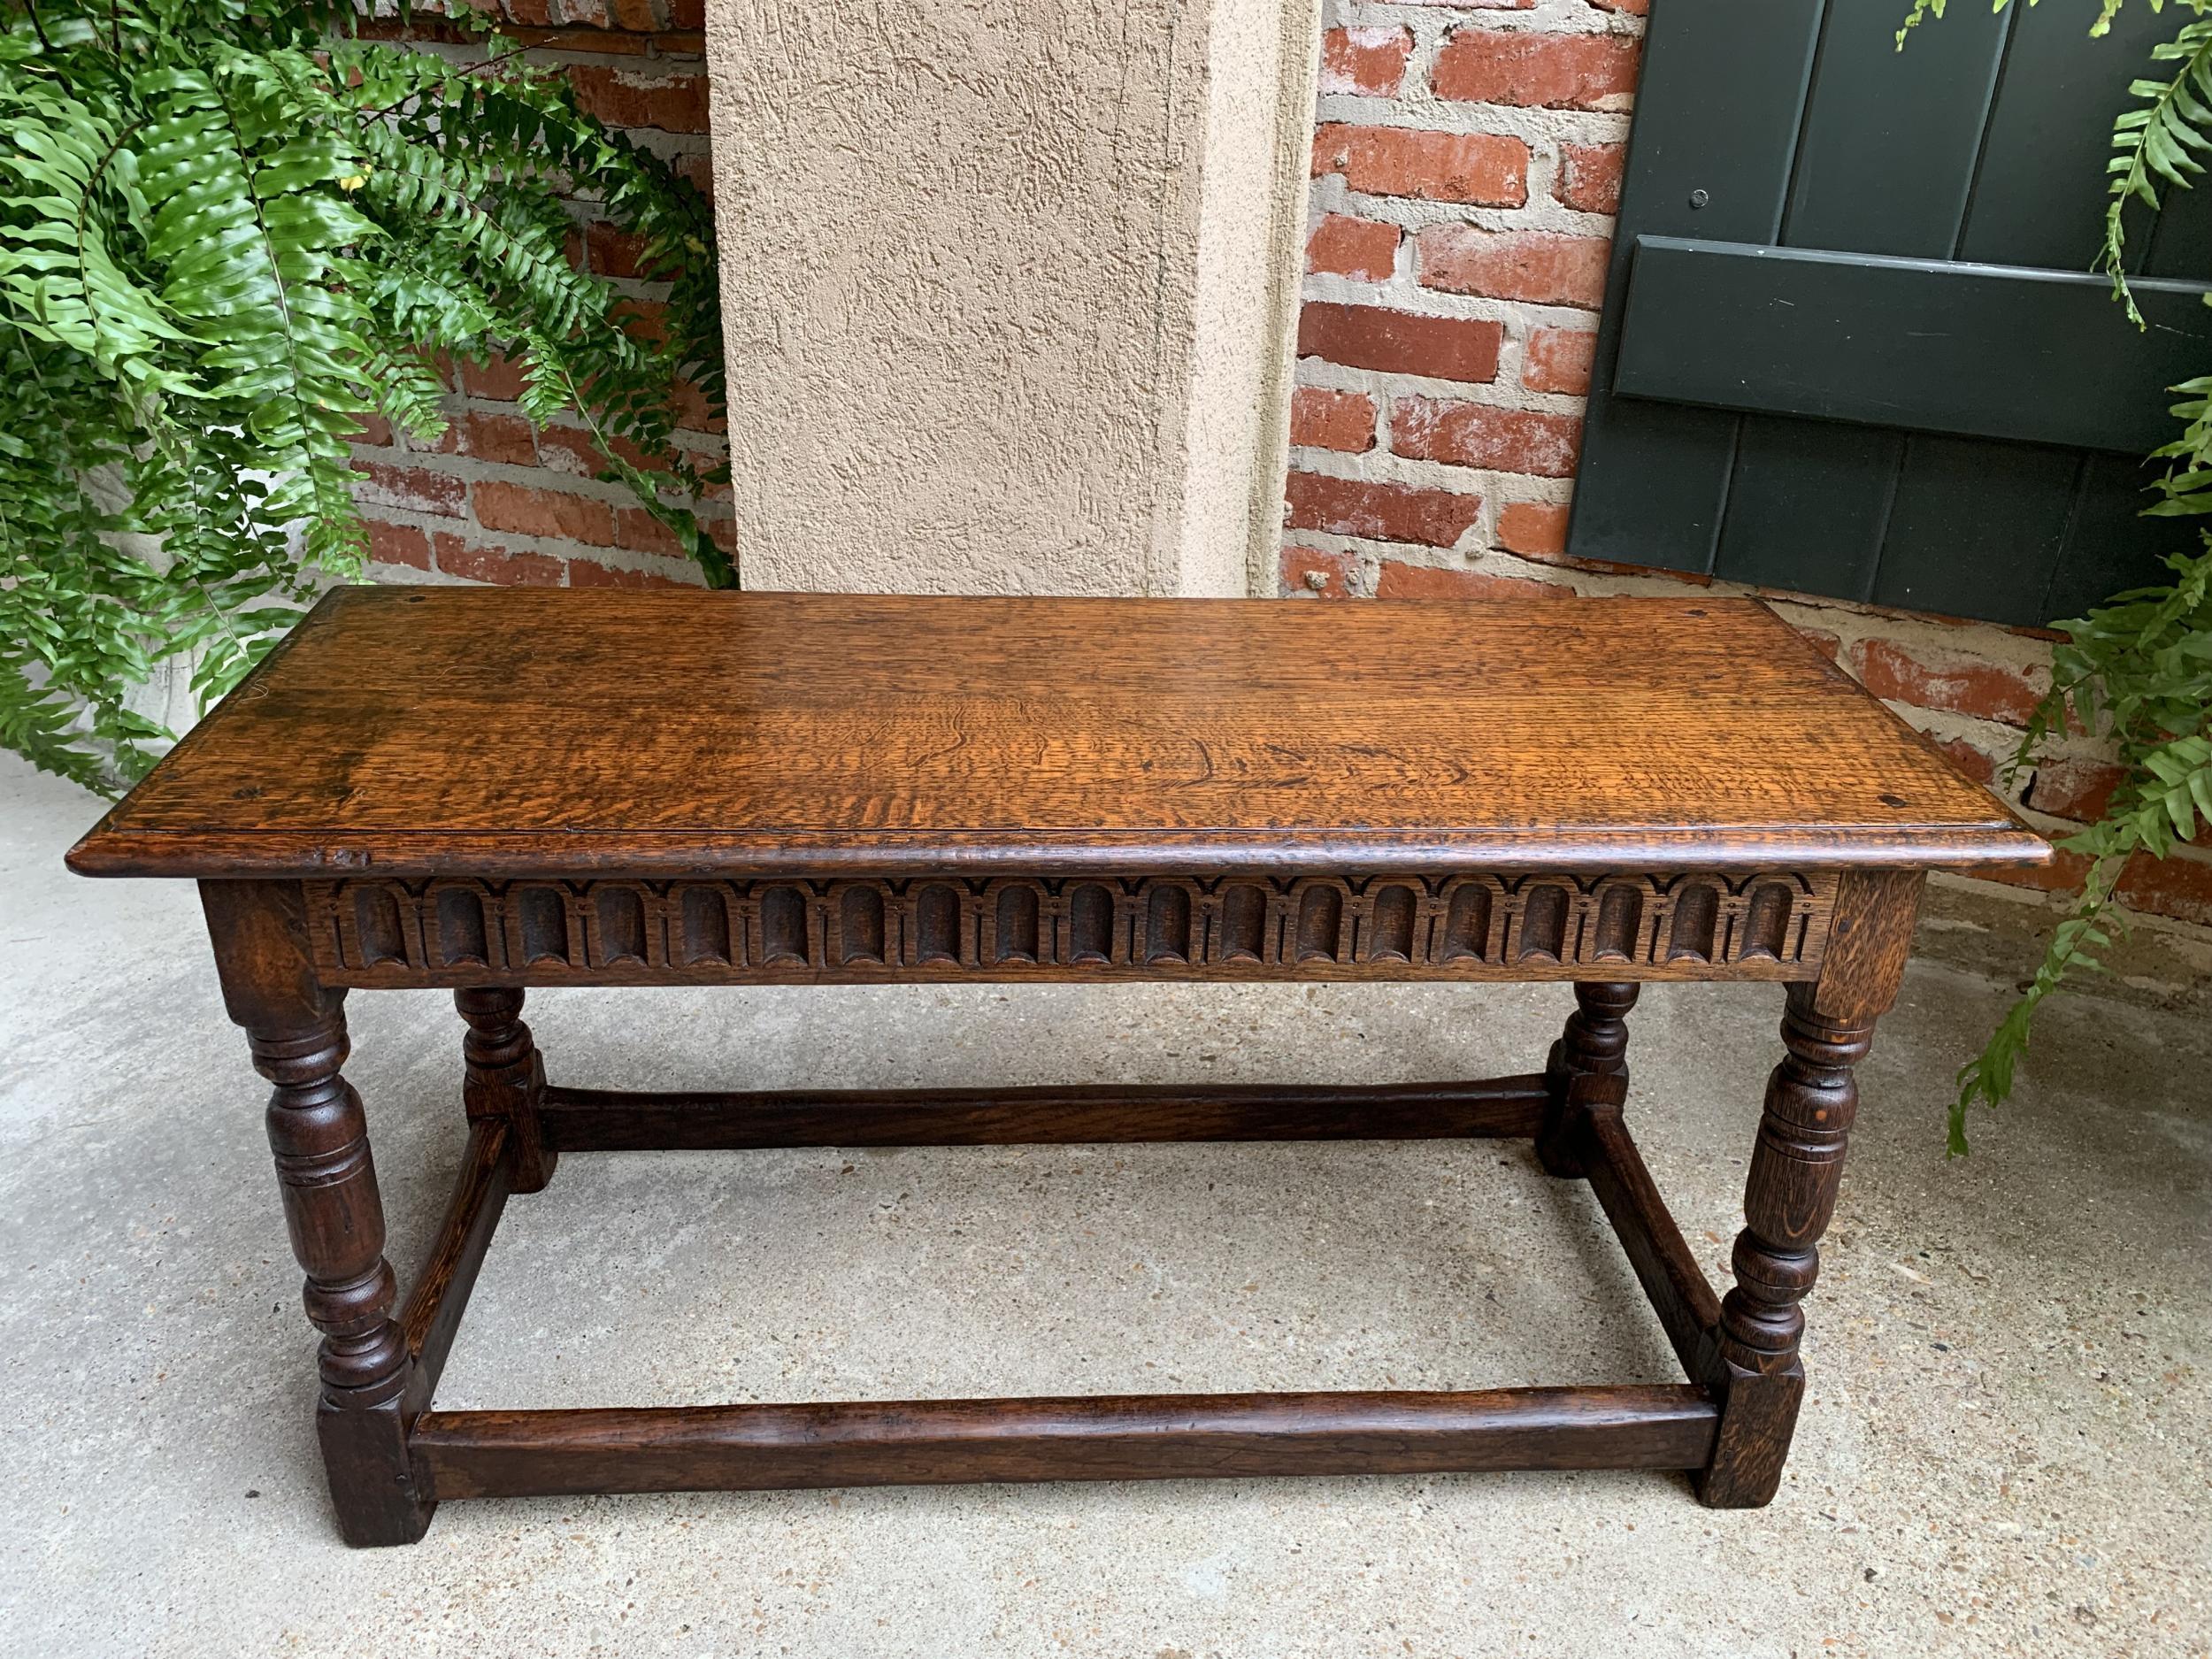 Antique English Carved Oak Pegged Joint Stool Duet Bench Window Seat, c1900 9